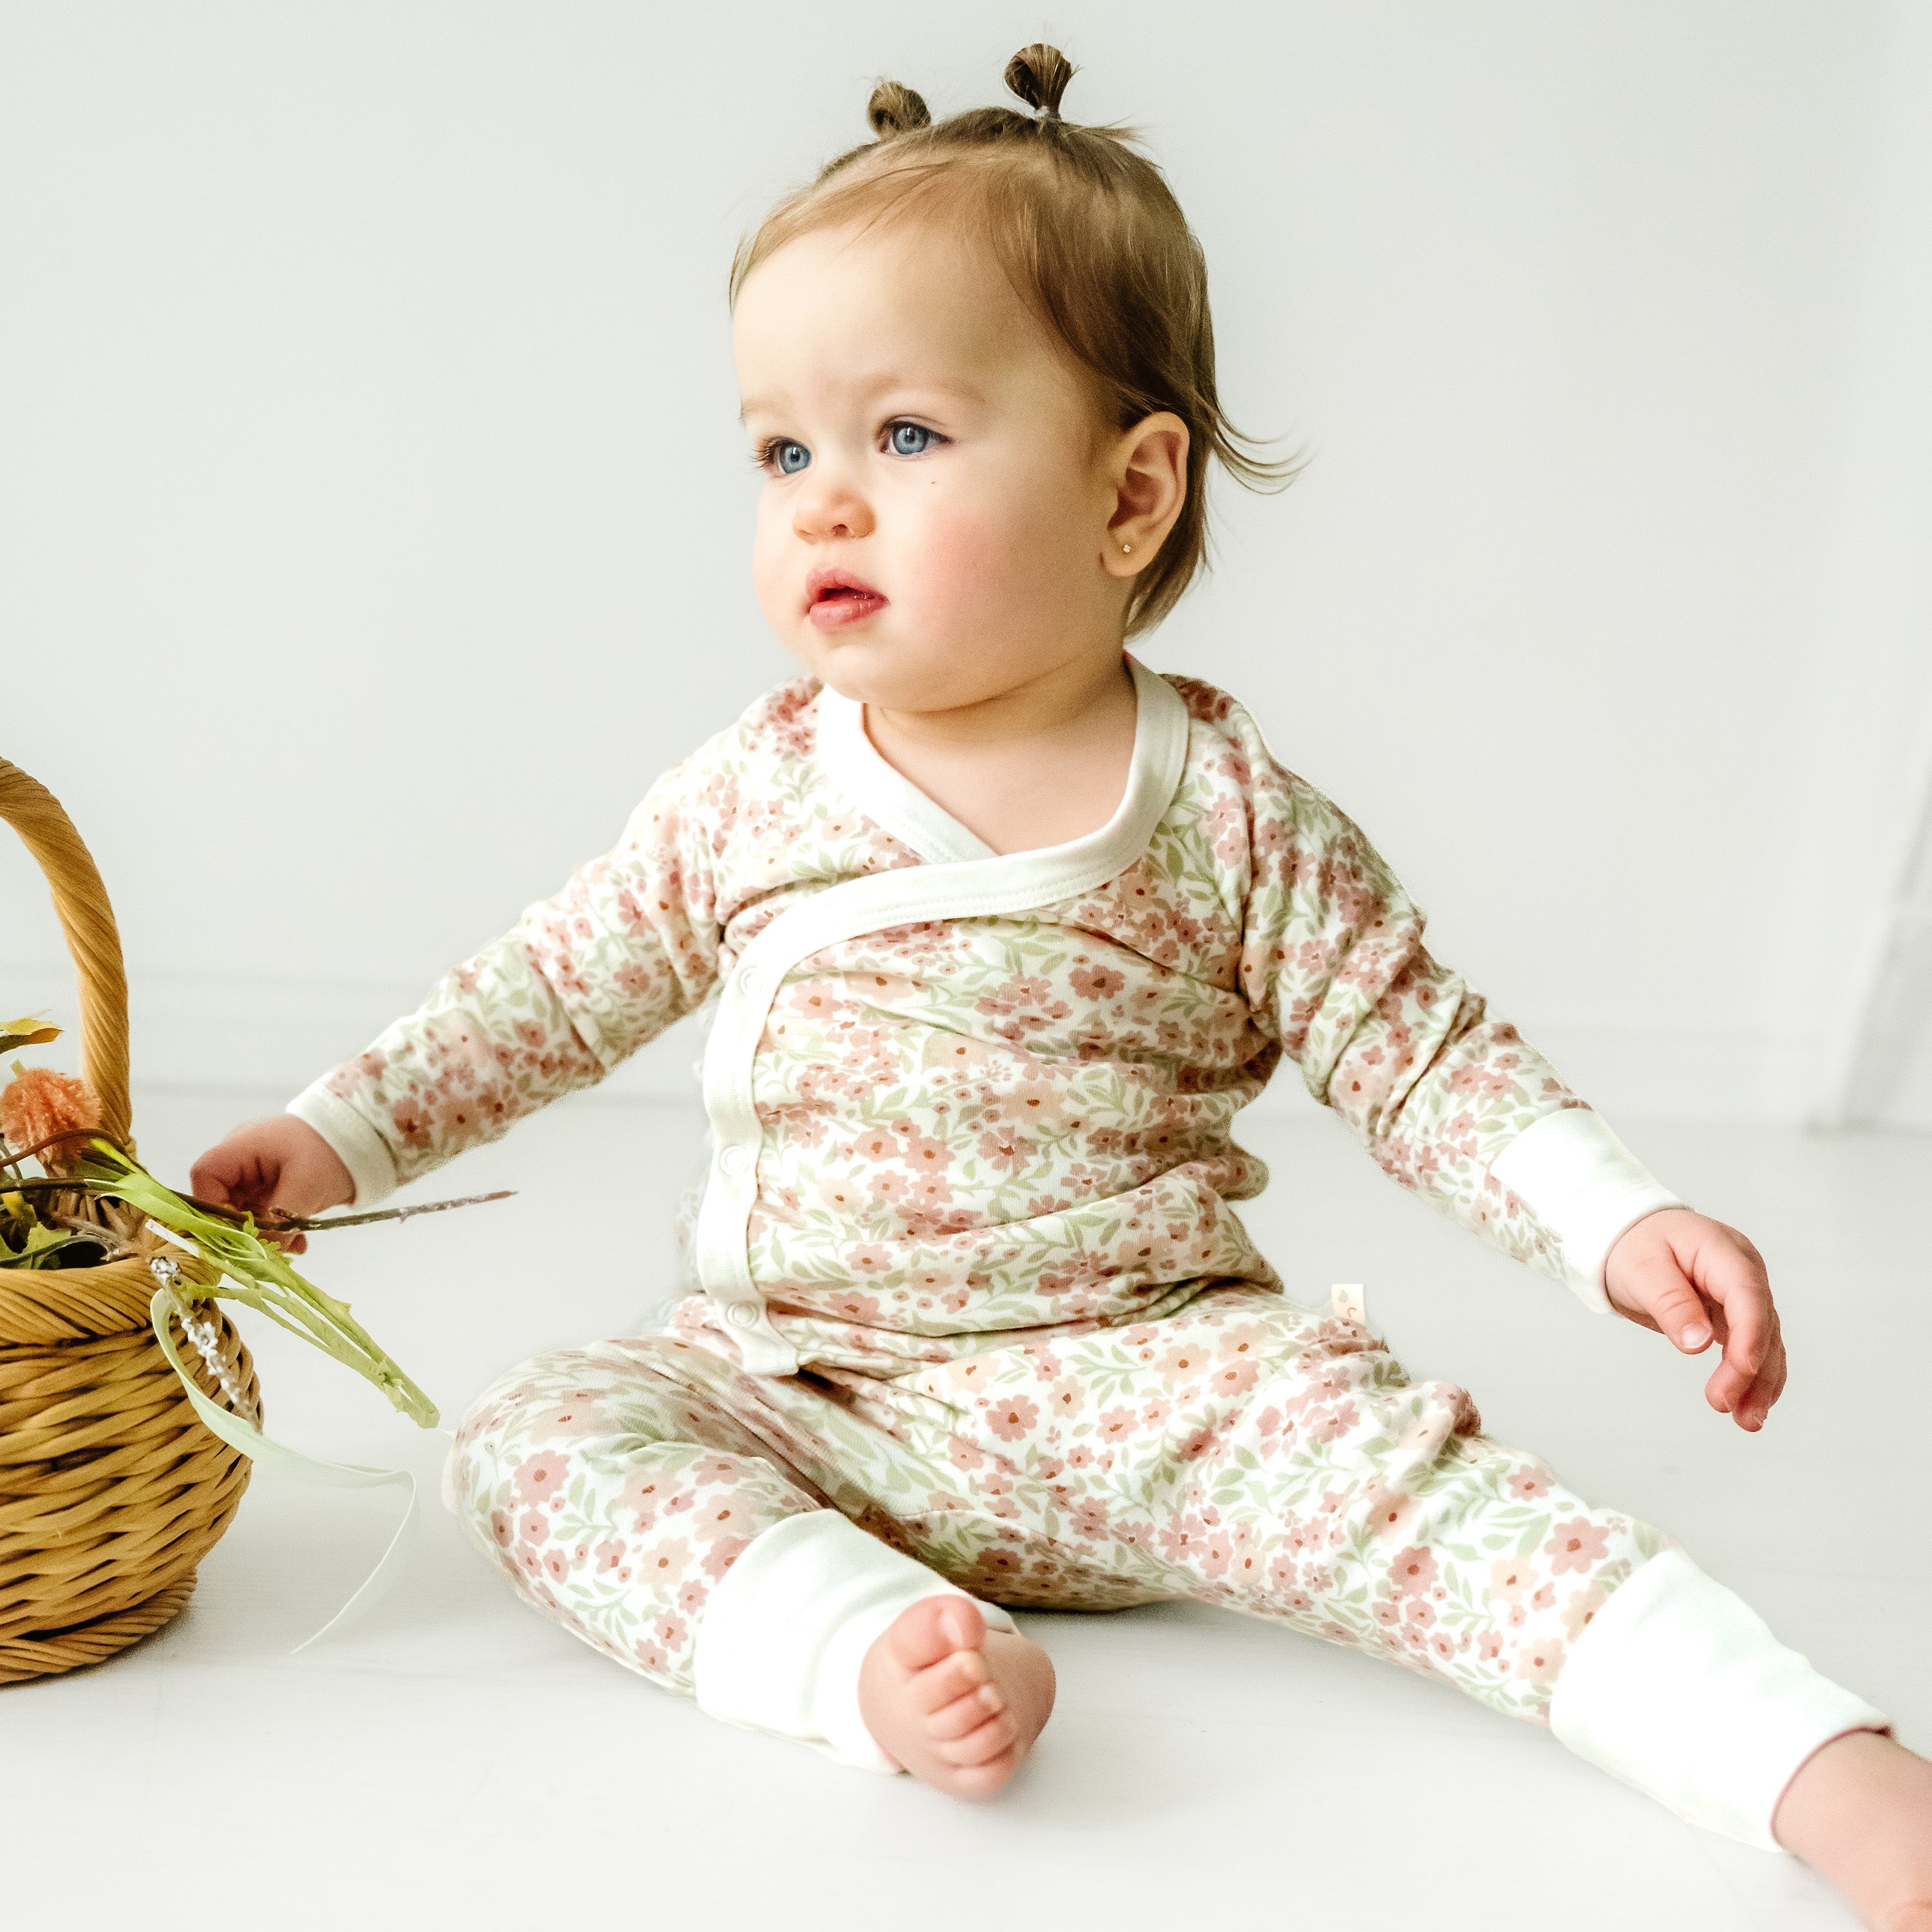 A toddler with two small tufts of hair sits on the floor, wearing a Makemake Organics Organic Kimono Top & Pants Set - Summer Floral, next to a wicker basket, looking to the side with a curious expression.